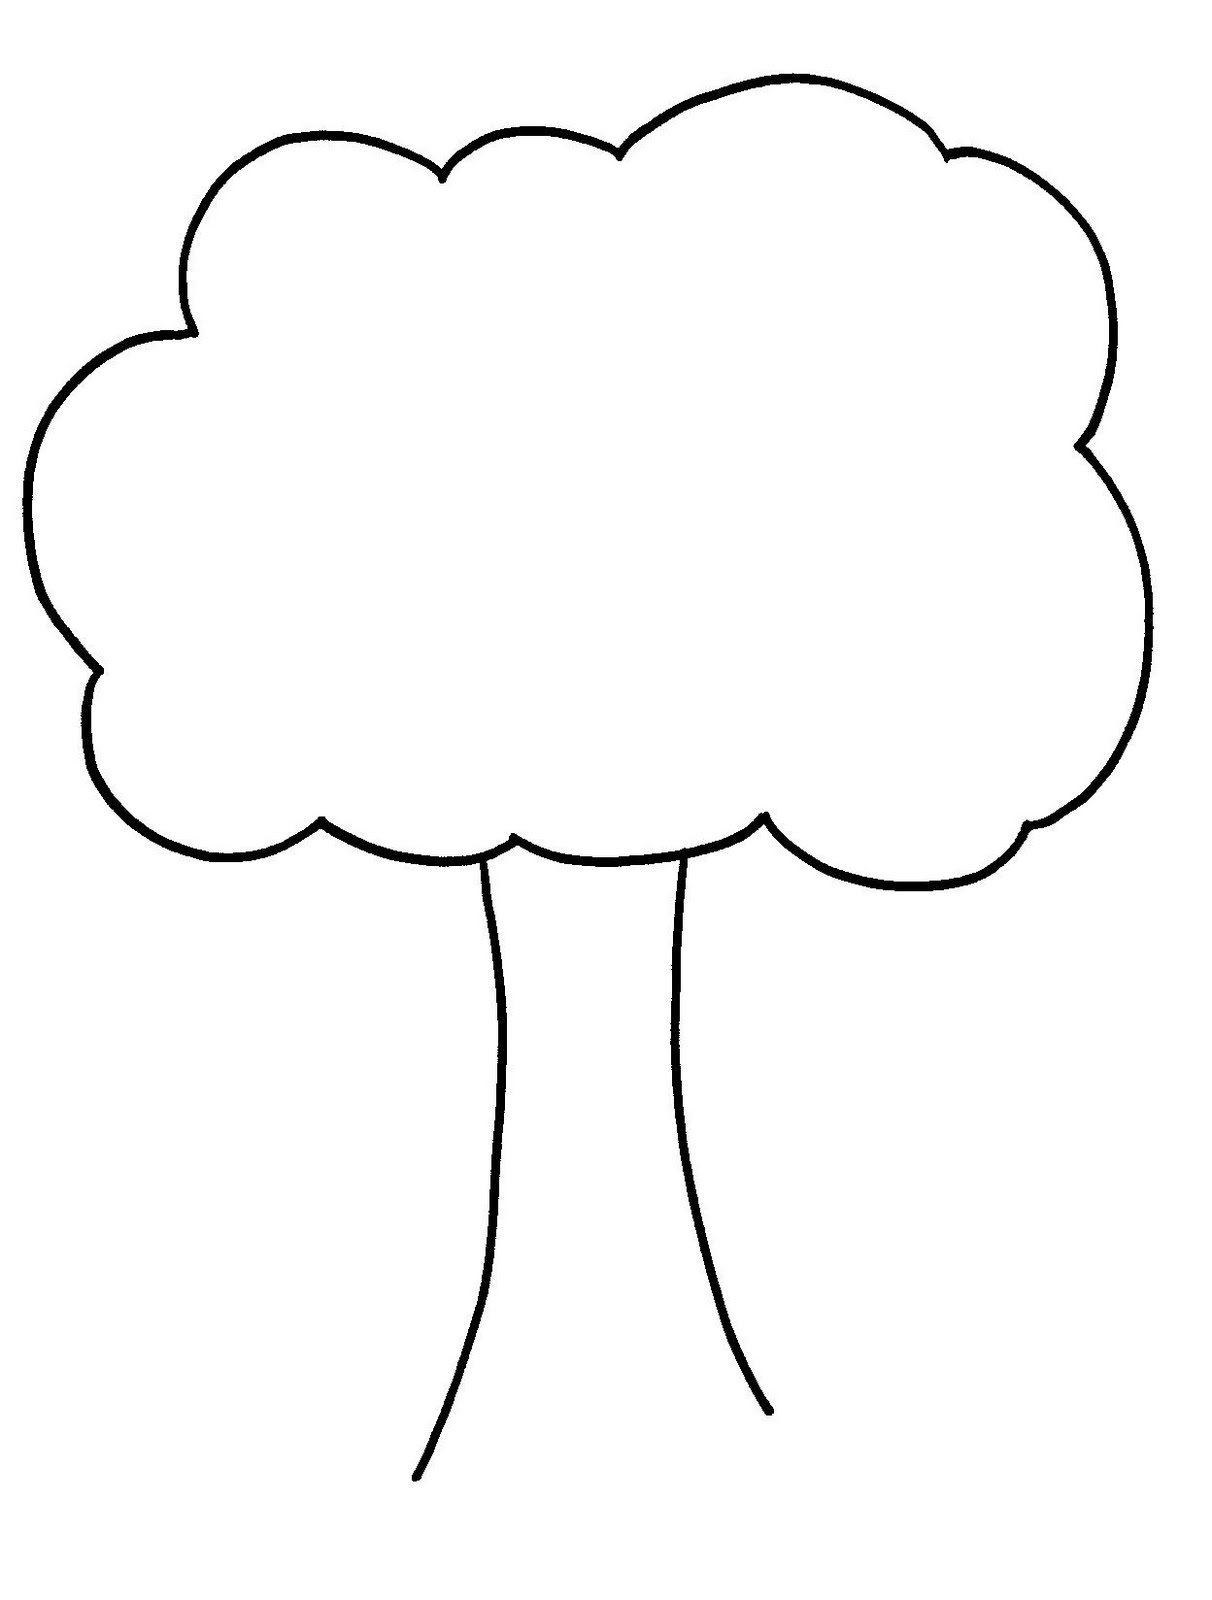 tree clipart outline